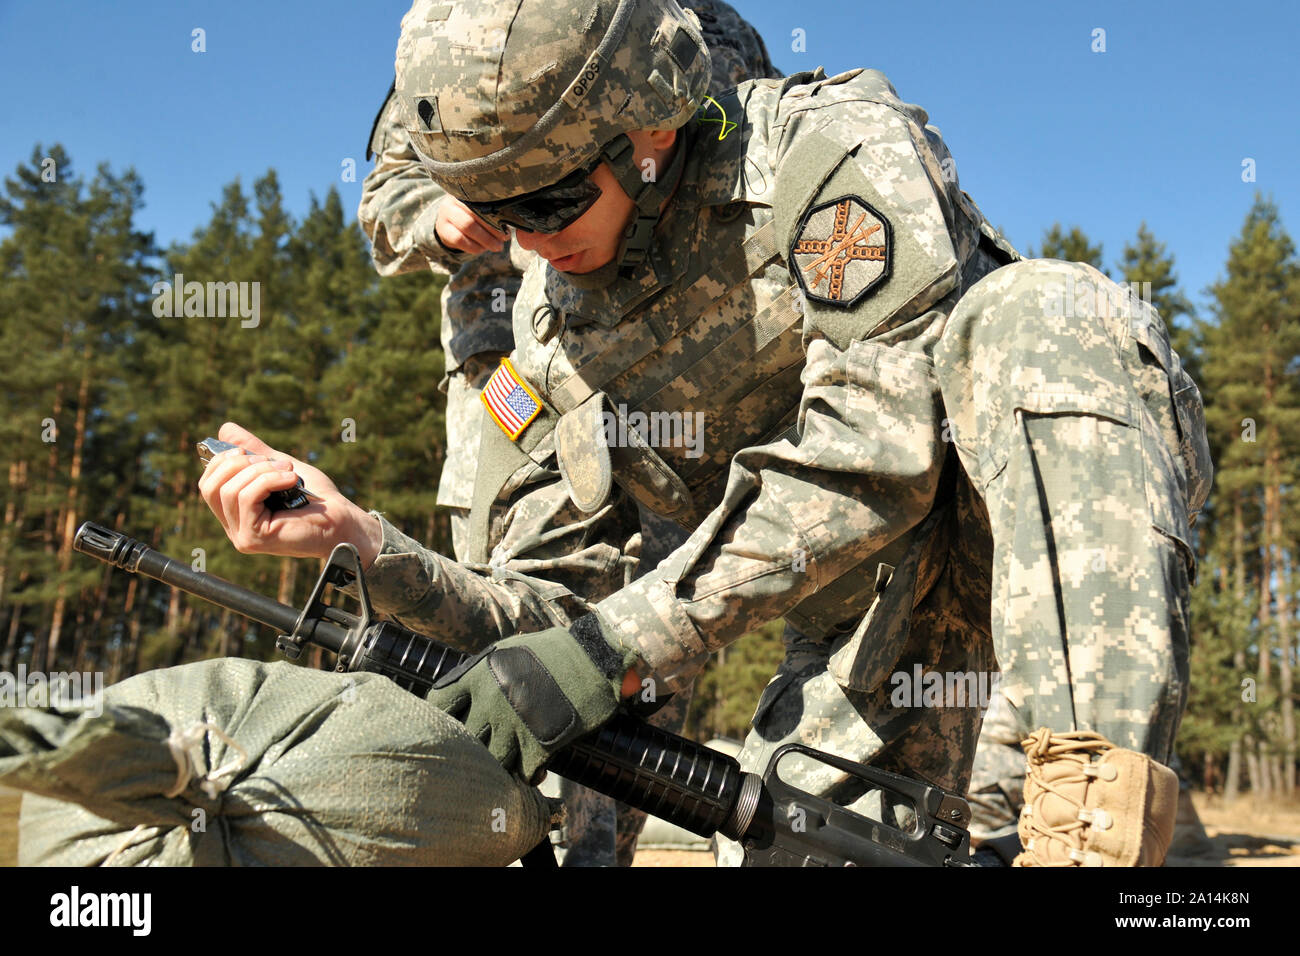 U.S. Army Soldier makes adjustments to the sight of his M16 rifle. Stock Photo